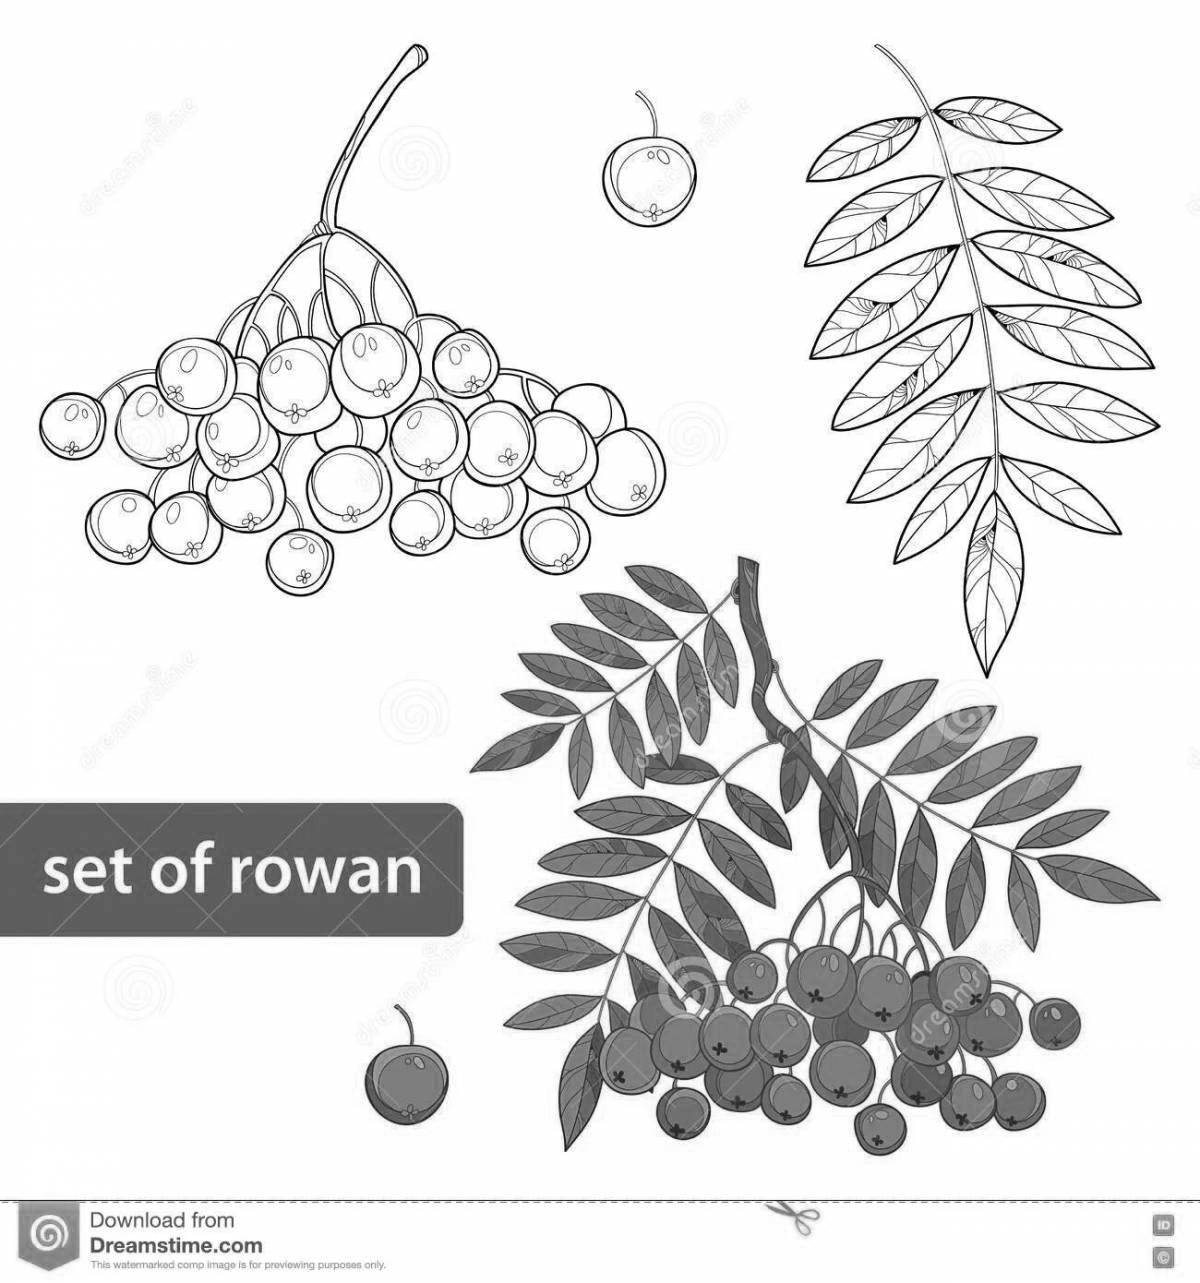 Bright twig of rowan coloring for children